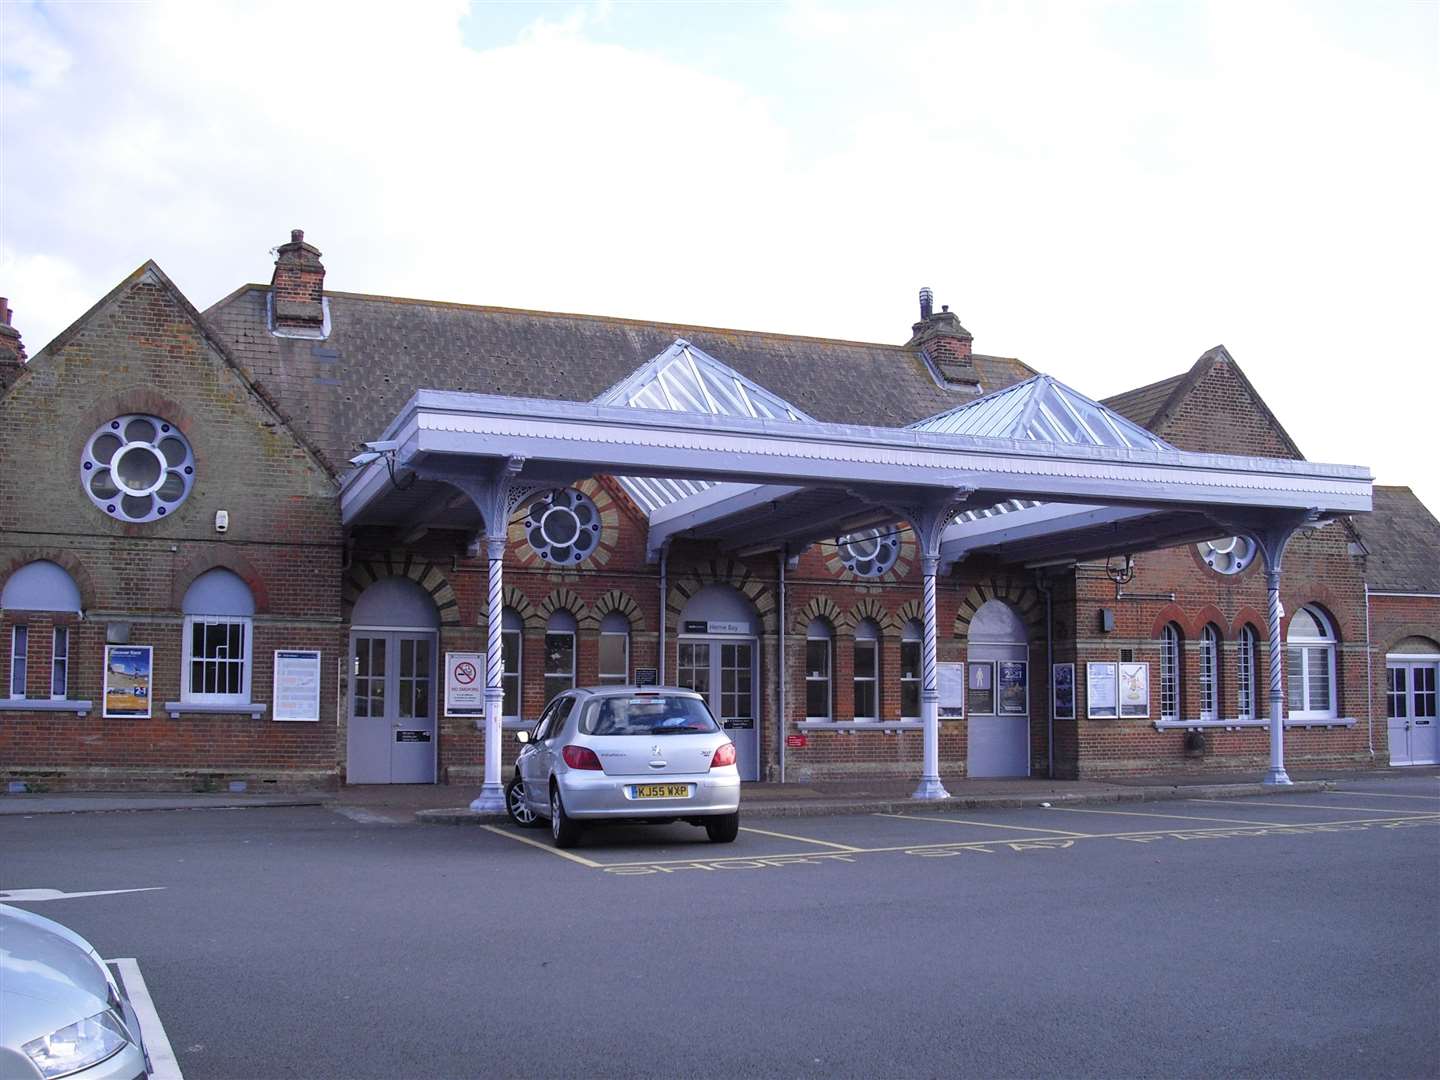 The attack happened as the victim walked from Herne Bay station